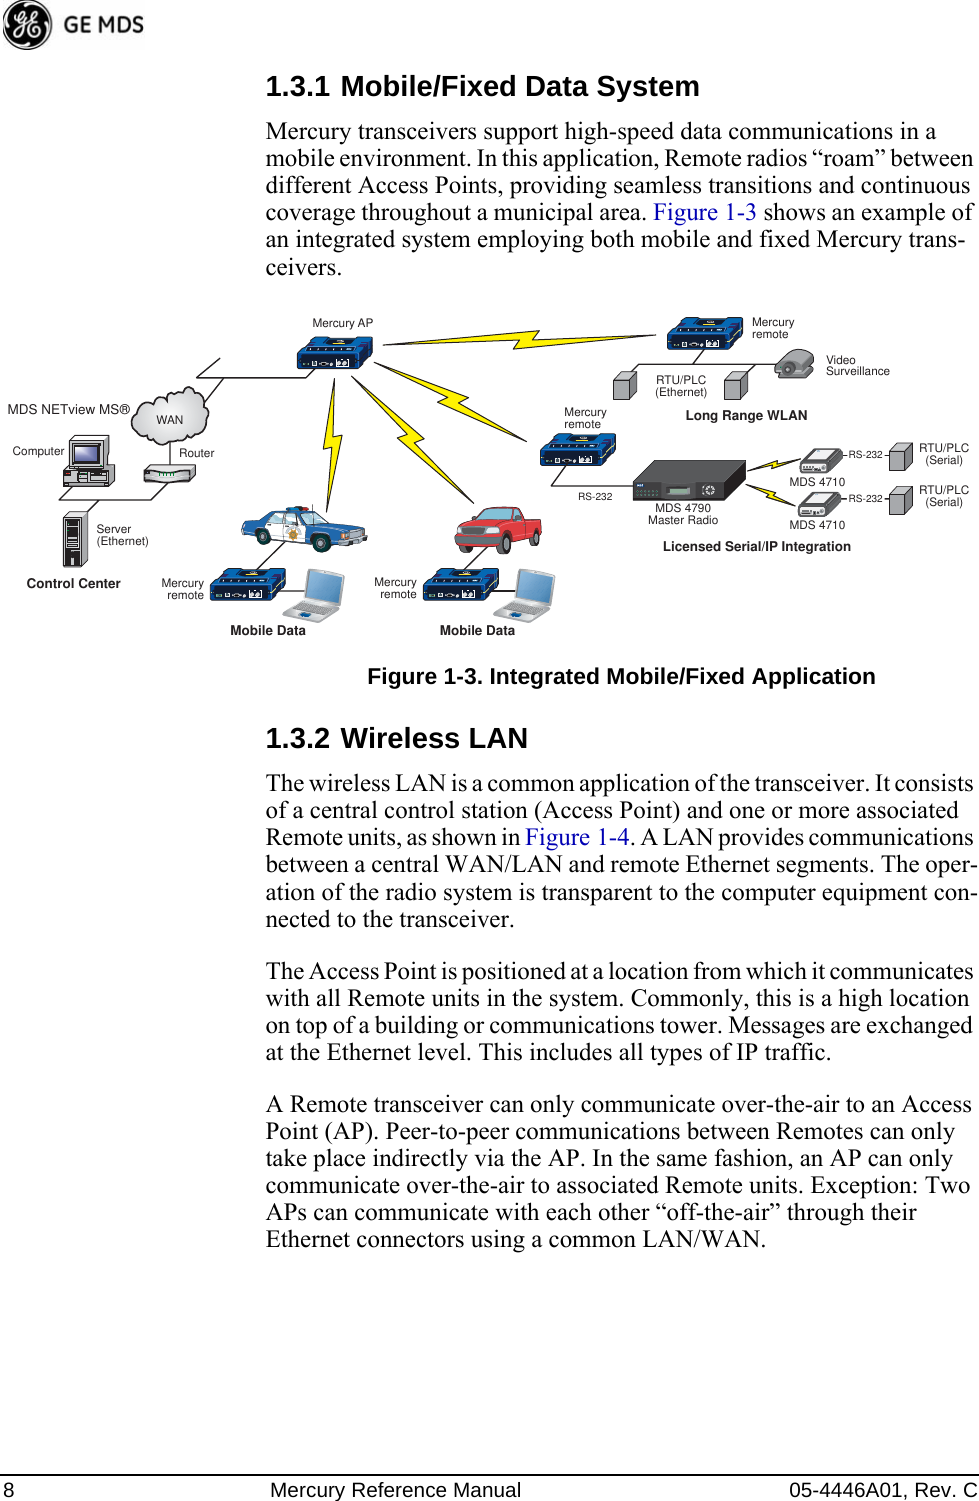 8 Mercury Reference Manual 05-4446A01, Rev. C1.3.1 Mobile/Fixed Data SystemMercury transceivers support high-speed data communications in a mobile environment. In this application, Remote radios “roam” between different Access Points, providing seamless transitions and continuous coverage throughout a municipal area. Figure 1-3 shows an example of an integrated system employing both mobile and fixed Mercury trans-ceivers.Invisible place holderFigure 1-3. Integrated Mobile/Fixed Application1.3.2 Wireless LANThe wireless LAN is a common application of the transceiver. It consists of a central control station (Access Point) and one or more associated Remote units, as shown in Figure 1-4. A LAN provides communications between a central WAN/LAN and remote Ethernet segments. The oper-ation of the radio system is transparent to the computer equipment con-nected to the transceiver.The Access Point is positioned at a location from which it communicates with all Remote units in the system. Commonly, this is a high location on top of a building or communications tower. Messages are exchanged at the Ethernet level. This includes all types of IP traffic.A Remote transceiver can only communicate over-the-air to an Access Point (AP). Peer-to-peer communications between Remotes can only take place indirectly via the AP. In the same fashion, an AP can only communicate over-the-air to associated Remote units. Exception: Two APs can communicate with each other “off-the-air” through their Ethernet connectors using a common LAN/WAN.MDS 4790Master RadioLicensed Serial/IP IntegrationMercury APMDS 4710RTU/PLC(Serial)RS-232RS-232RS-232MDS 4710RTU/PLC(Serial)RTU/PLC(Ethernet)Long Range WLANMobile DataMobile DataMDS NETview MS®Server(Ethernet)Computer RouterWANVideoSurveillanceMercuryremoteControl Center MercuryremoteMercuryremoteMercuryremote